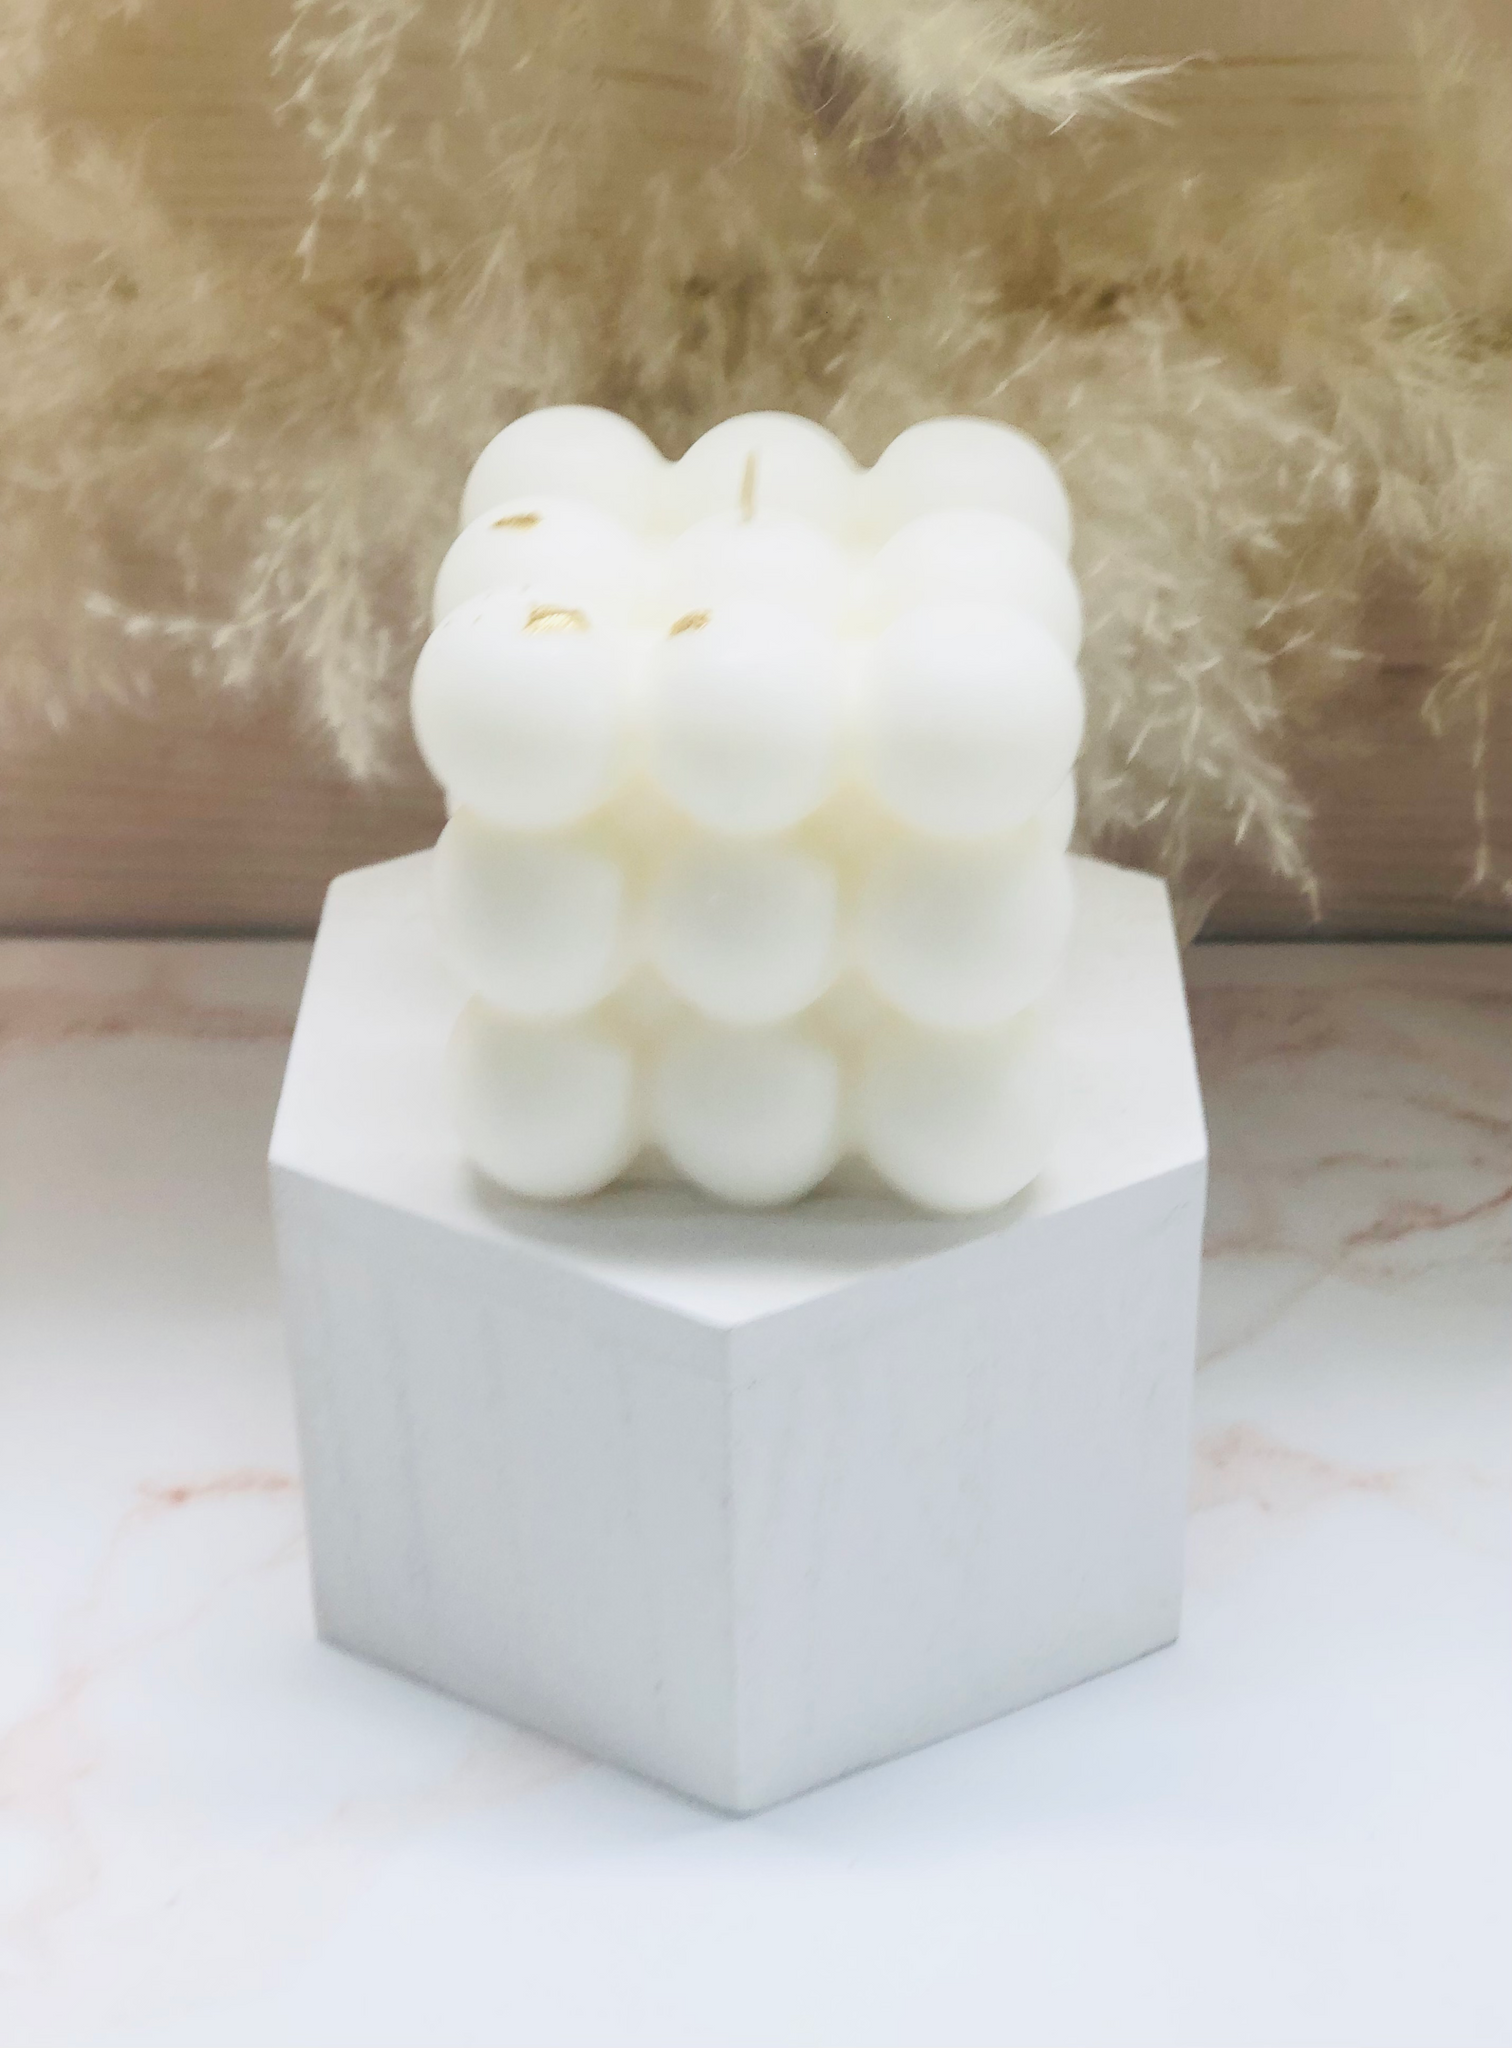 Buy Loftern White Bubble Candle - Scented Bubble Cube Candle